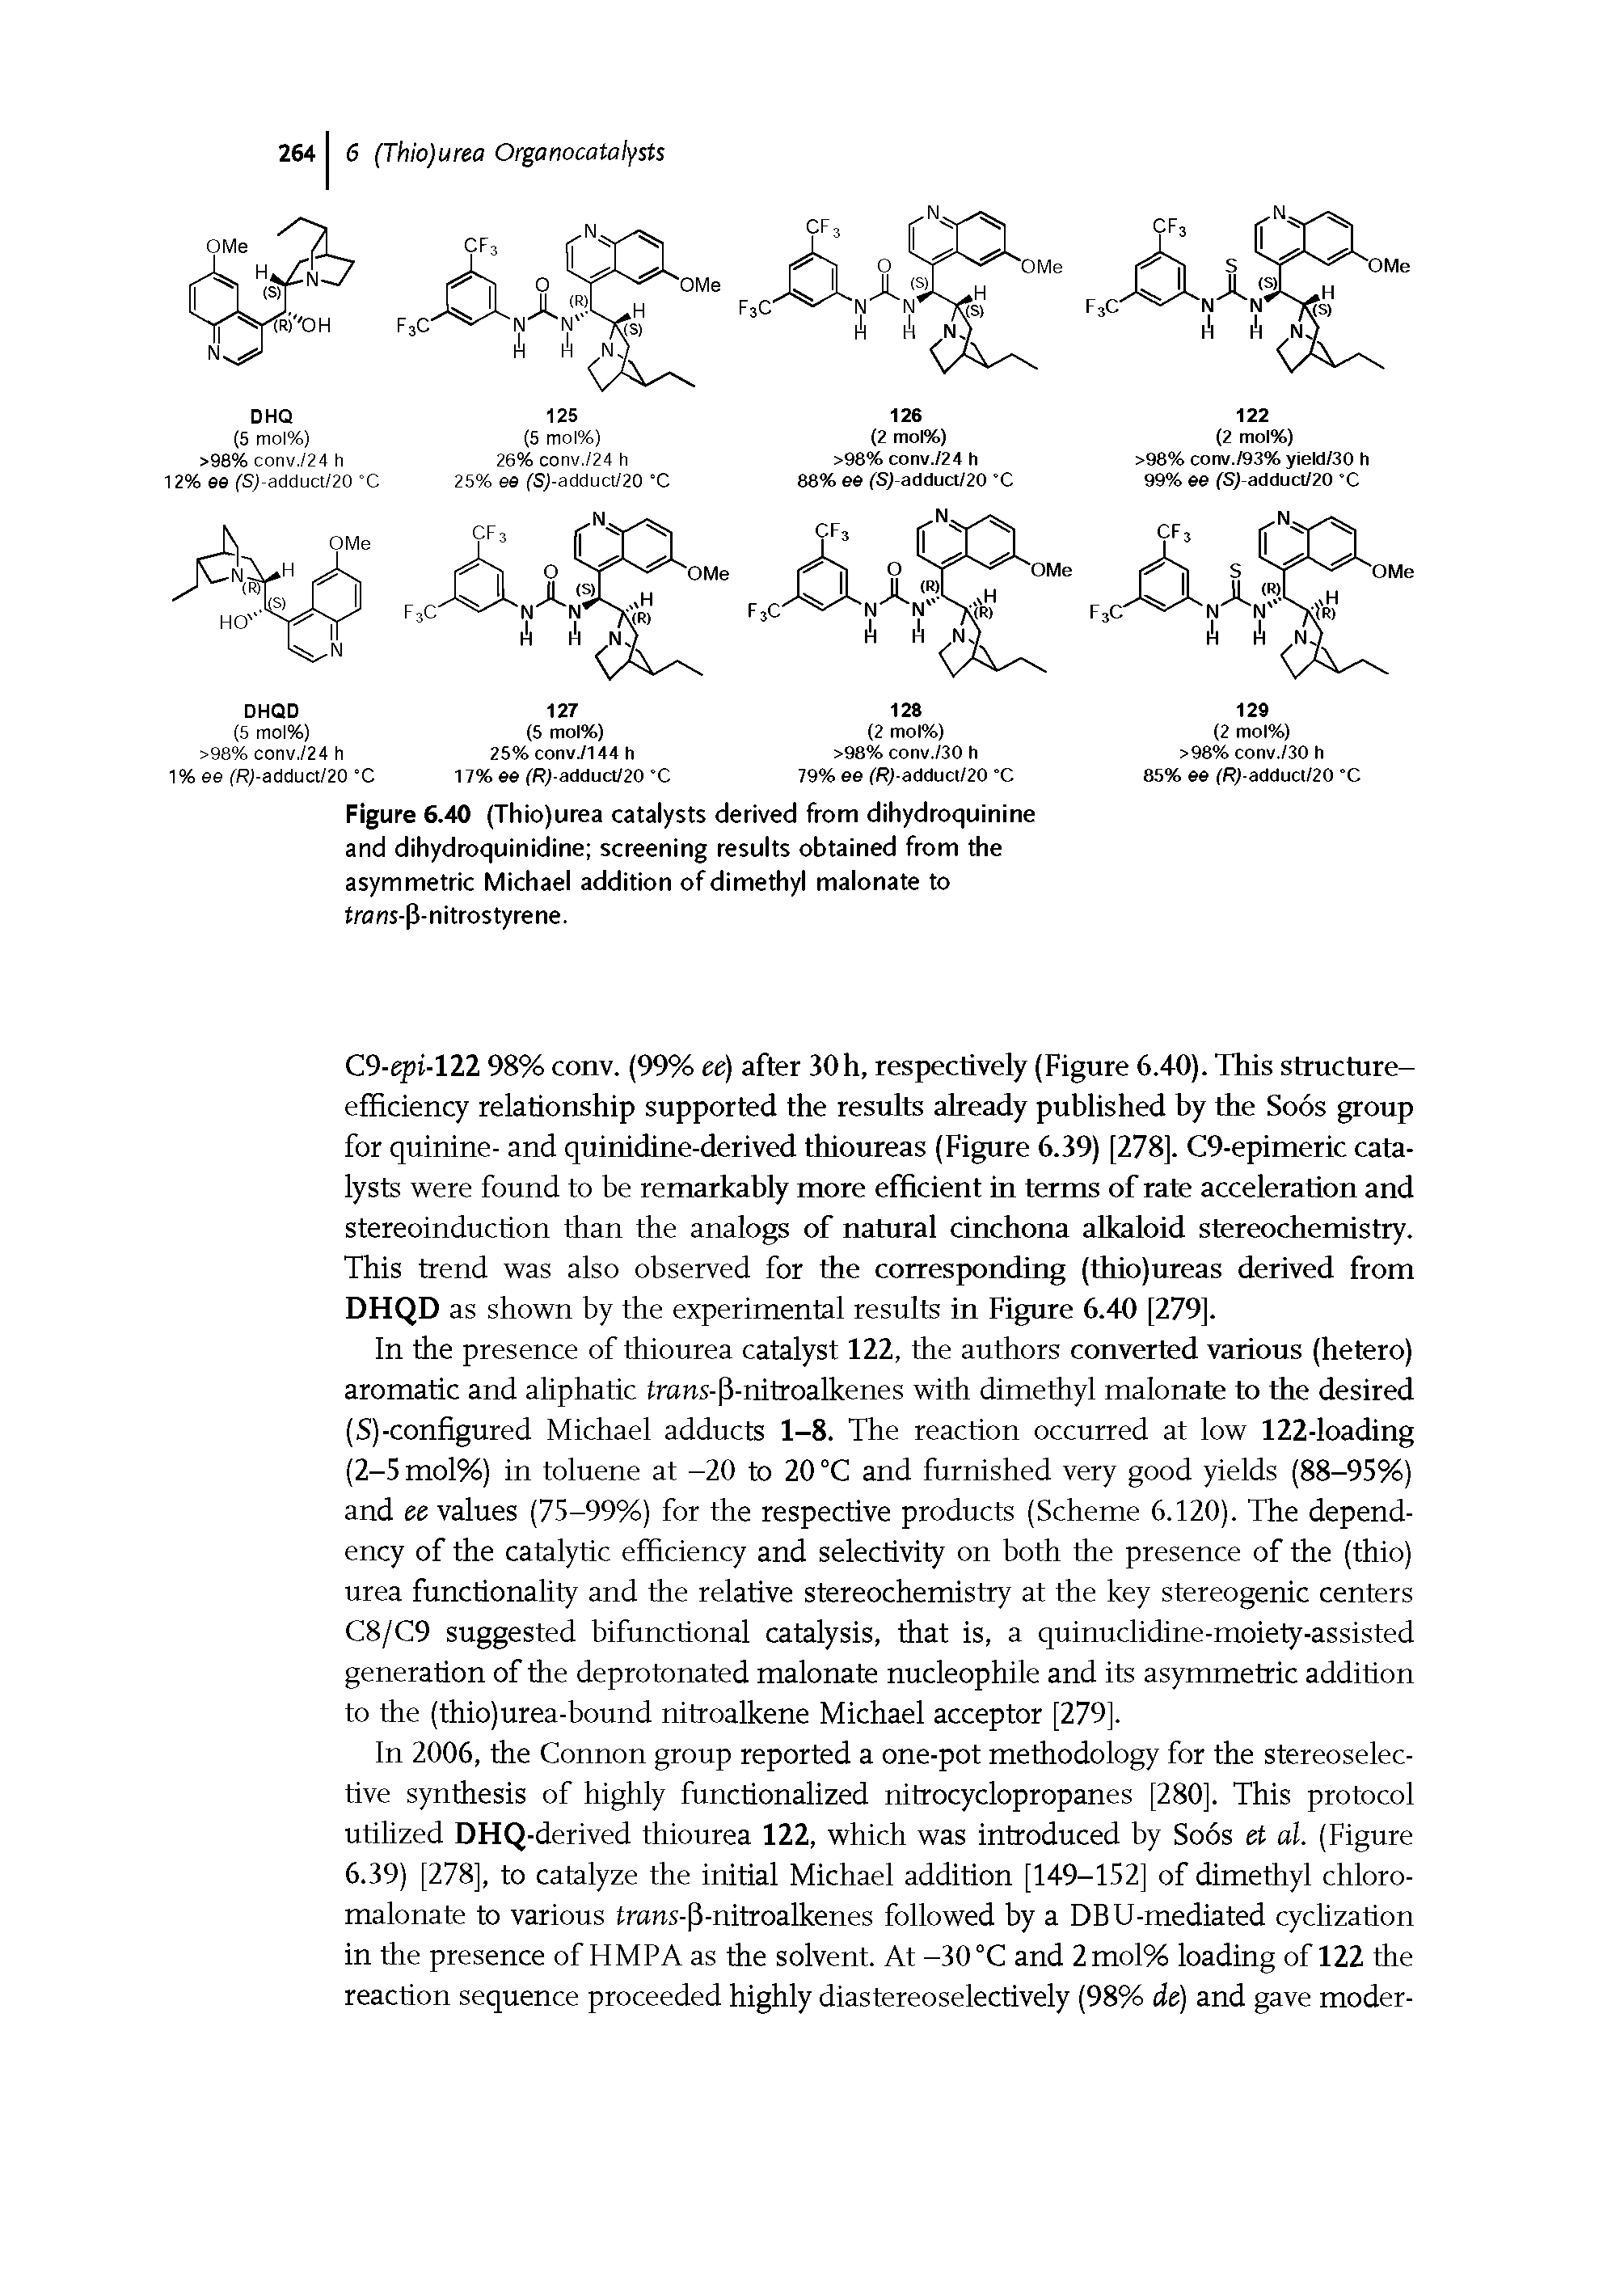 Figure 6.40 (Thio)urea catalysts derived from dihydroquinine and dihydroquinidine screening results obtained from the asymmetric Michael addition of dimethyl malonate to frans-p-nitrostyrene.